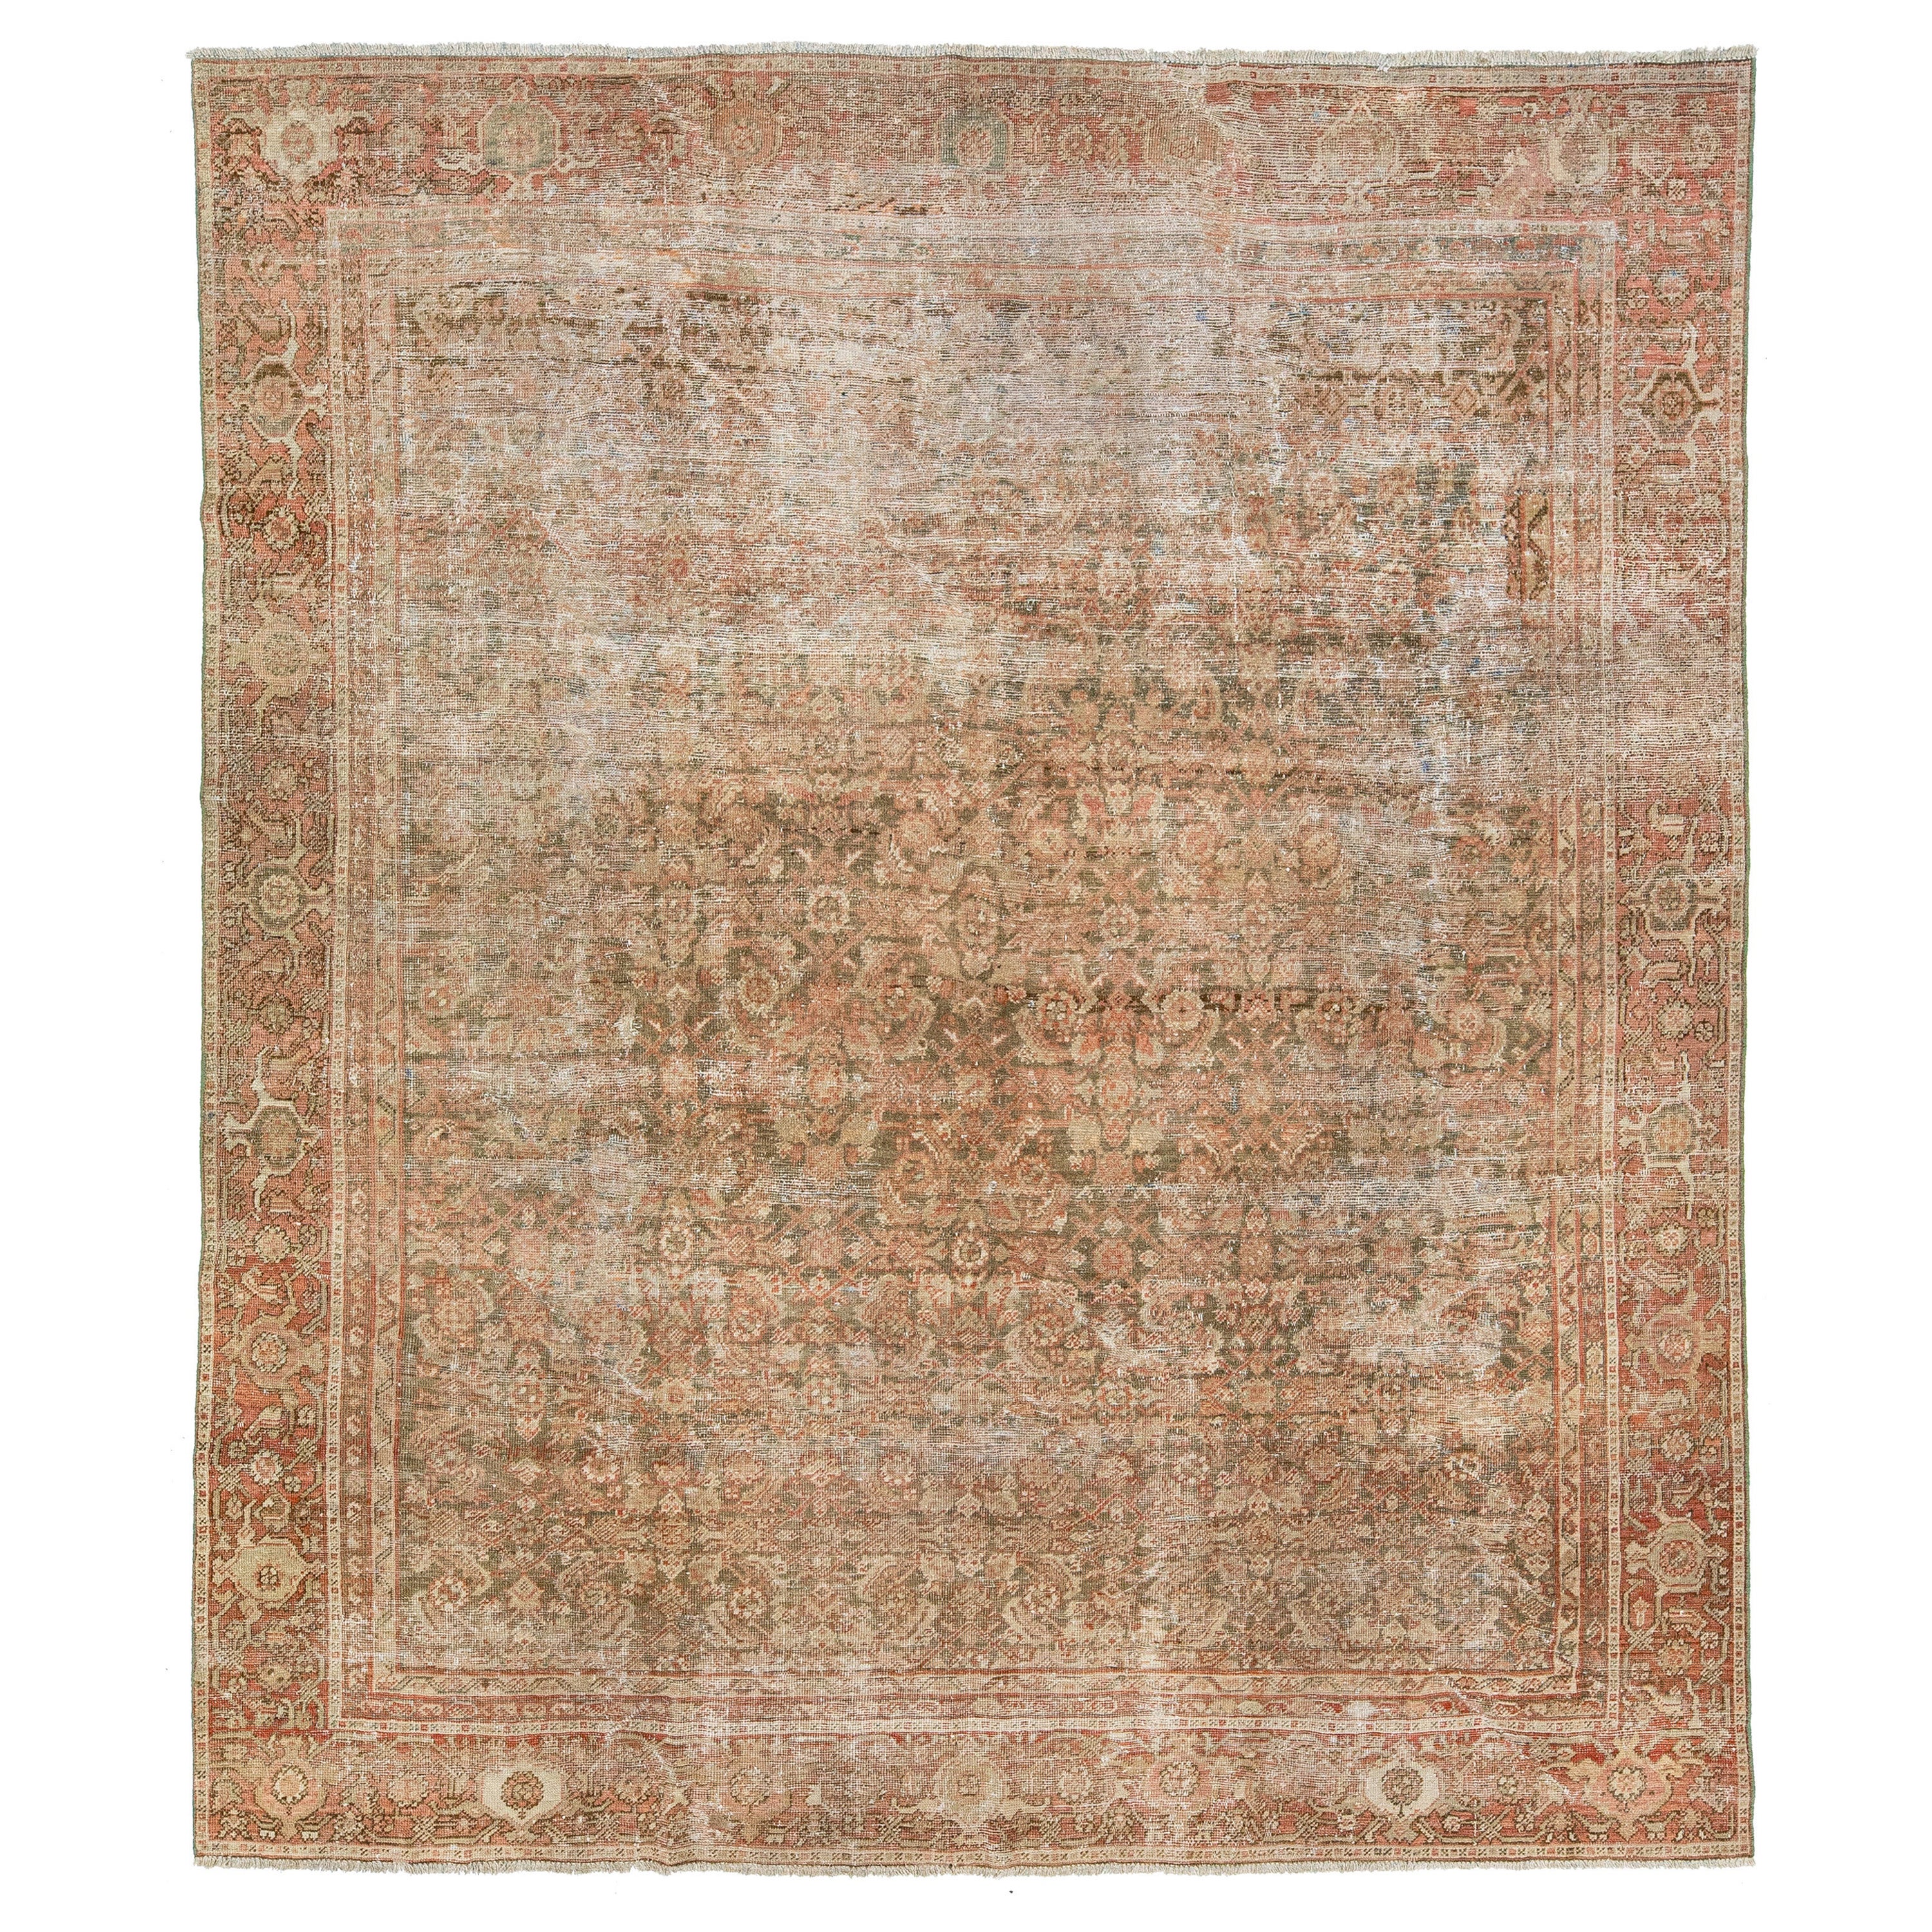 Antique Persian Tabriz Wool Rug with Rust Allover Design from the 1910s